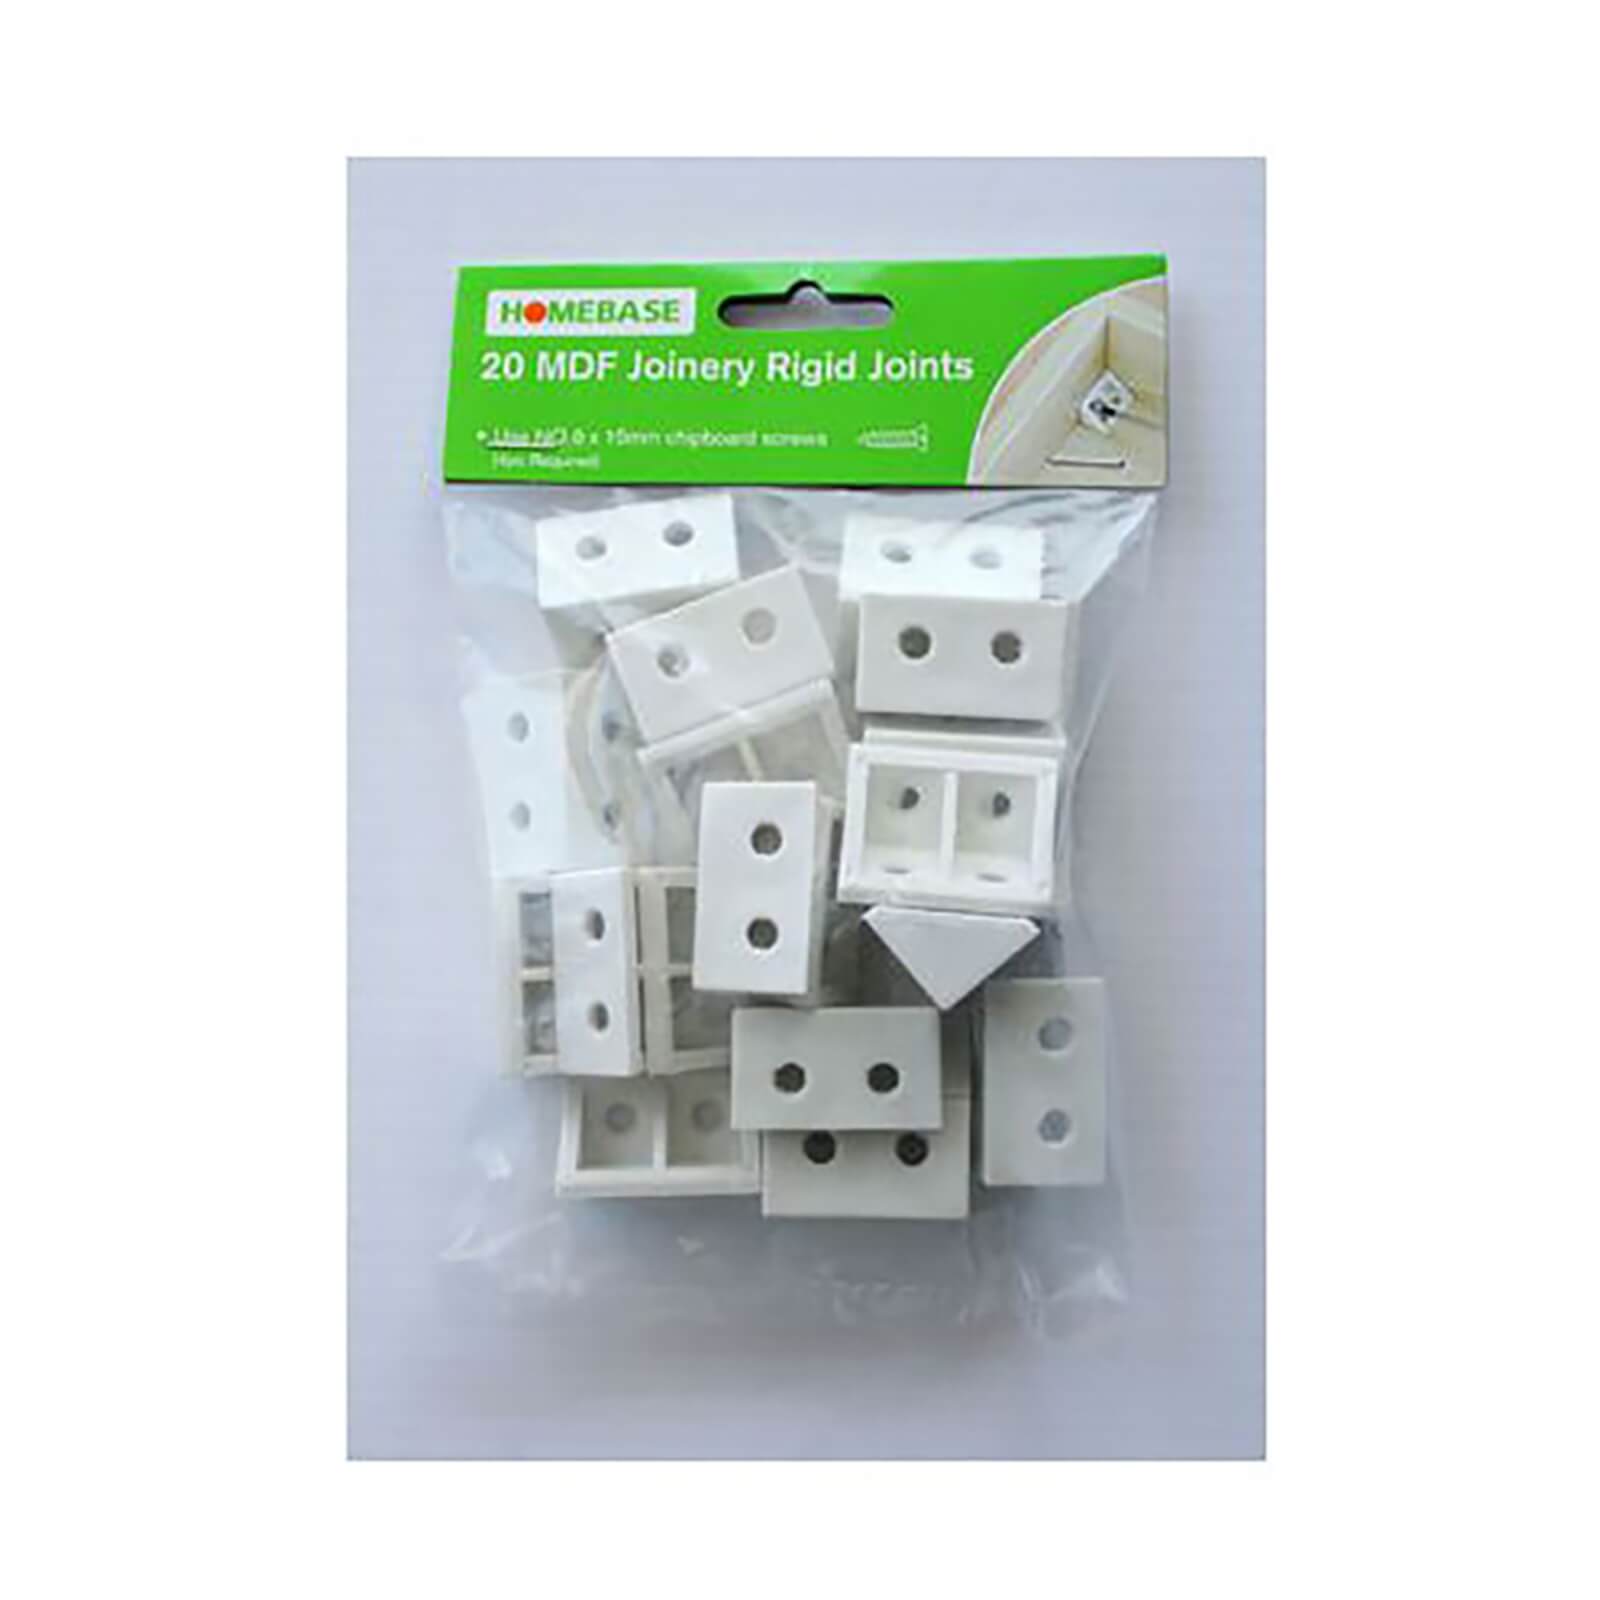 MDF Joinery Rigid Joints - 20 Pack